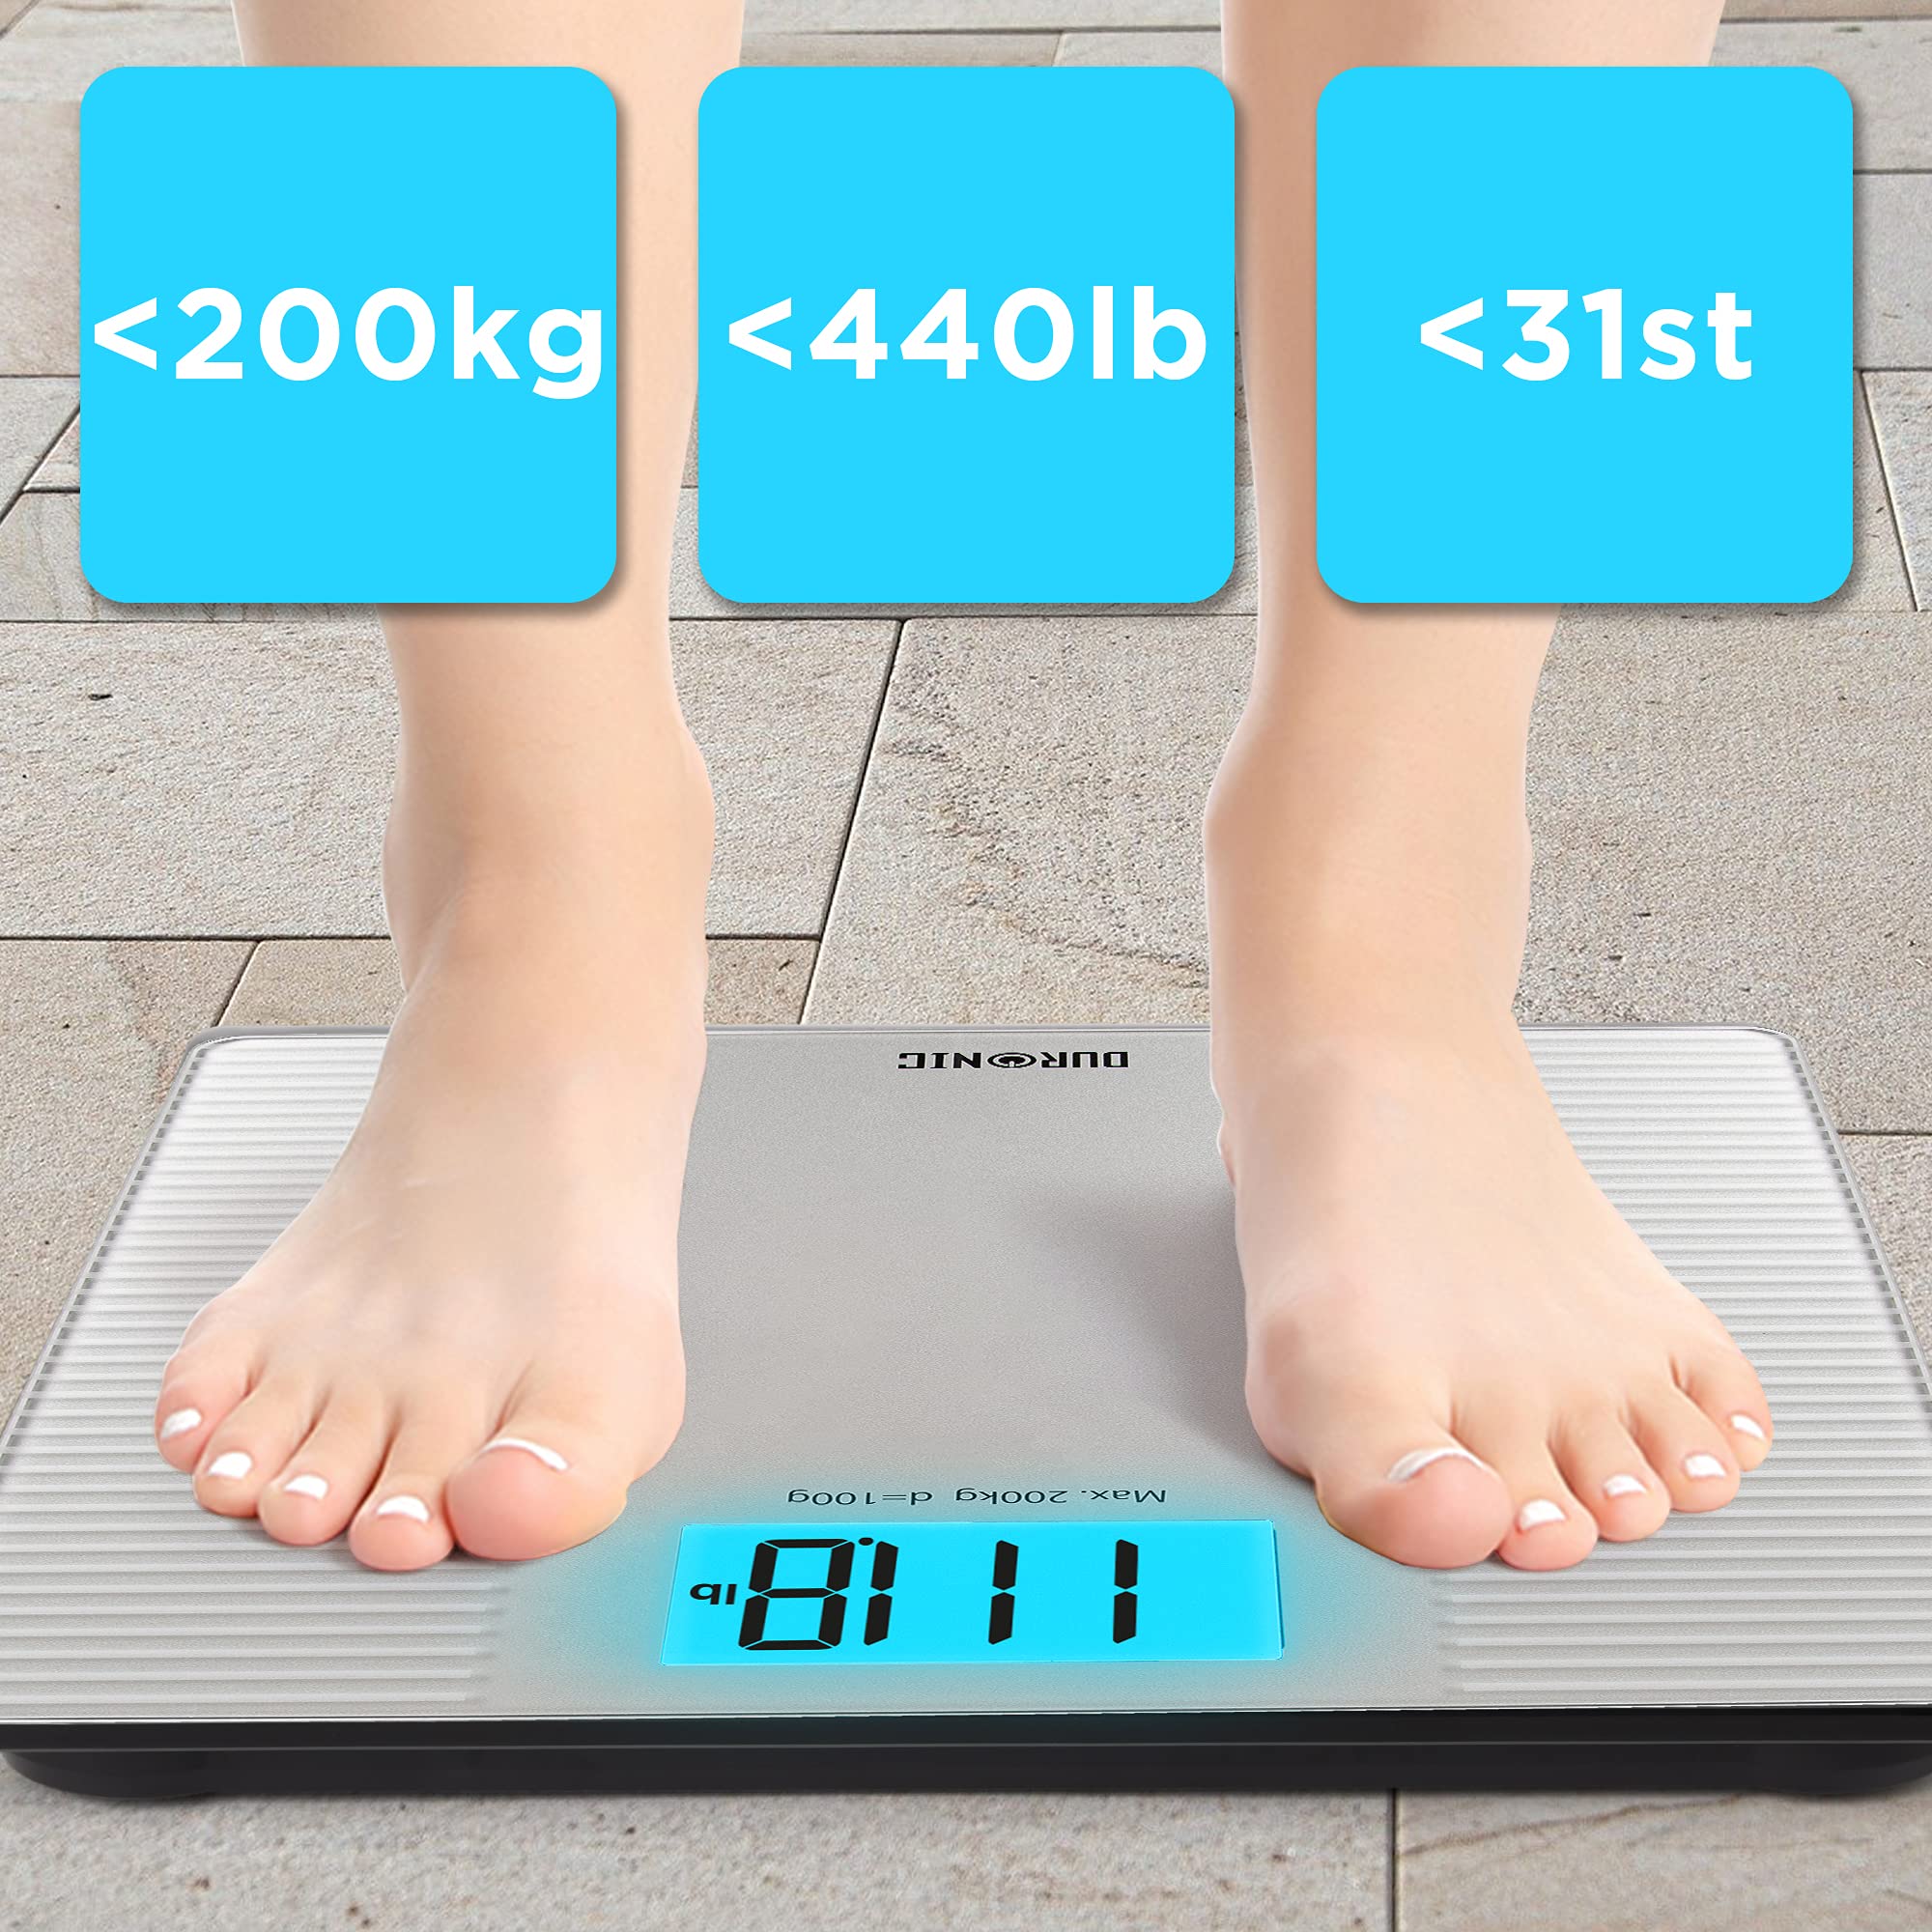 Duronic Body Scales BS204 | Measures Body Weight in Kilograms, Pounds & Stones | Silver Non-Slip Design | Step-On Activation Bathroom Scales | Precision Sensors | XL Digital Display | 200kg Capacity